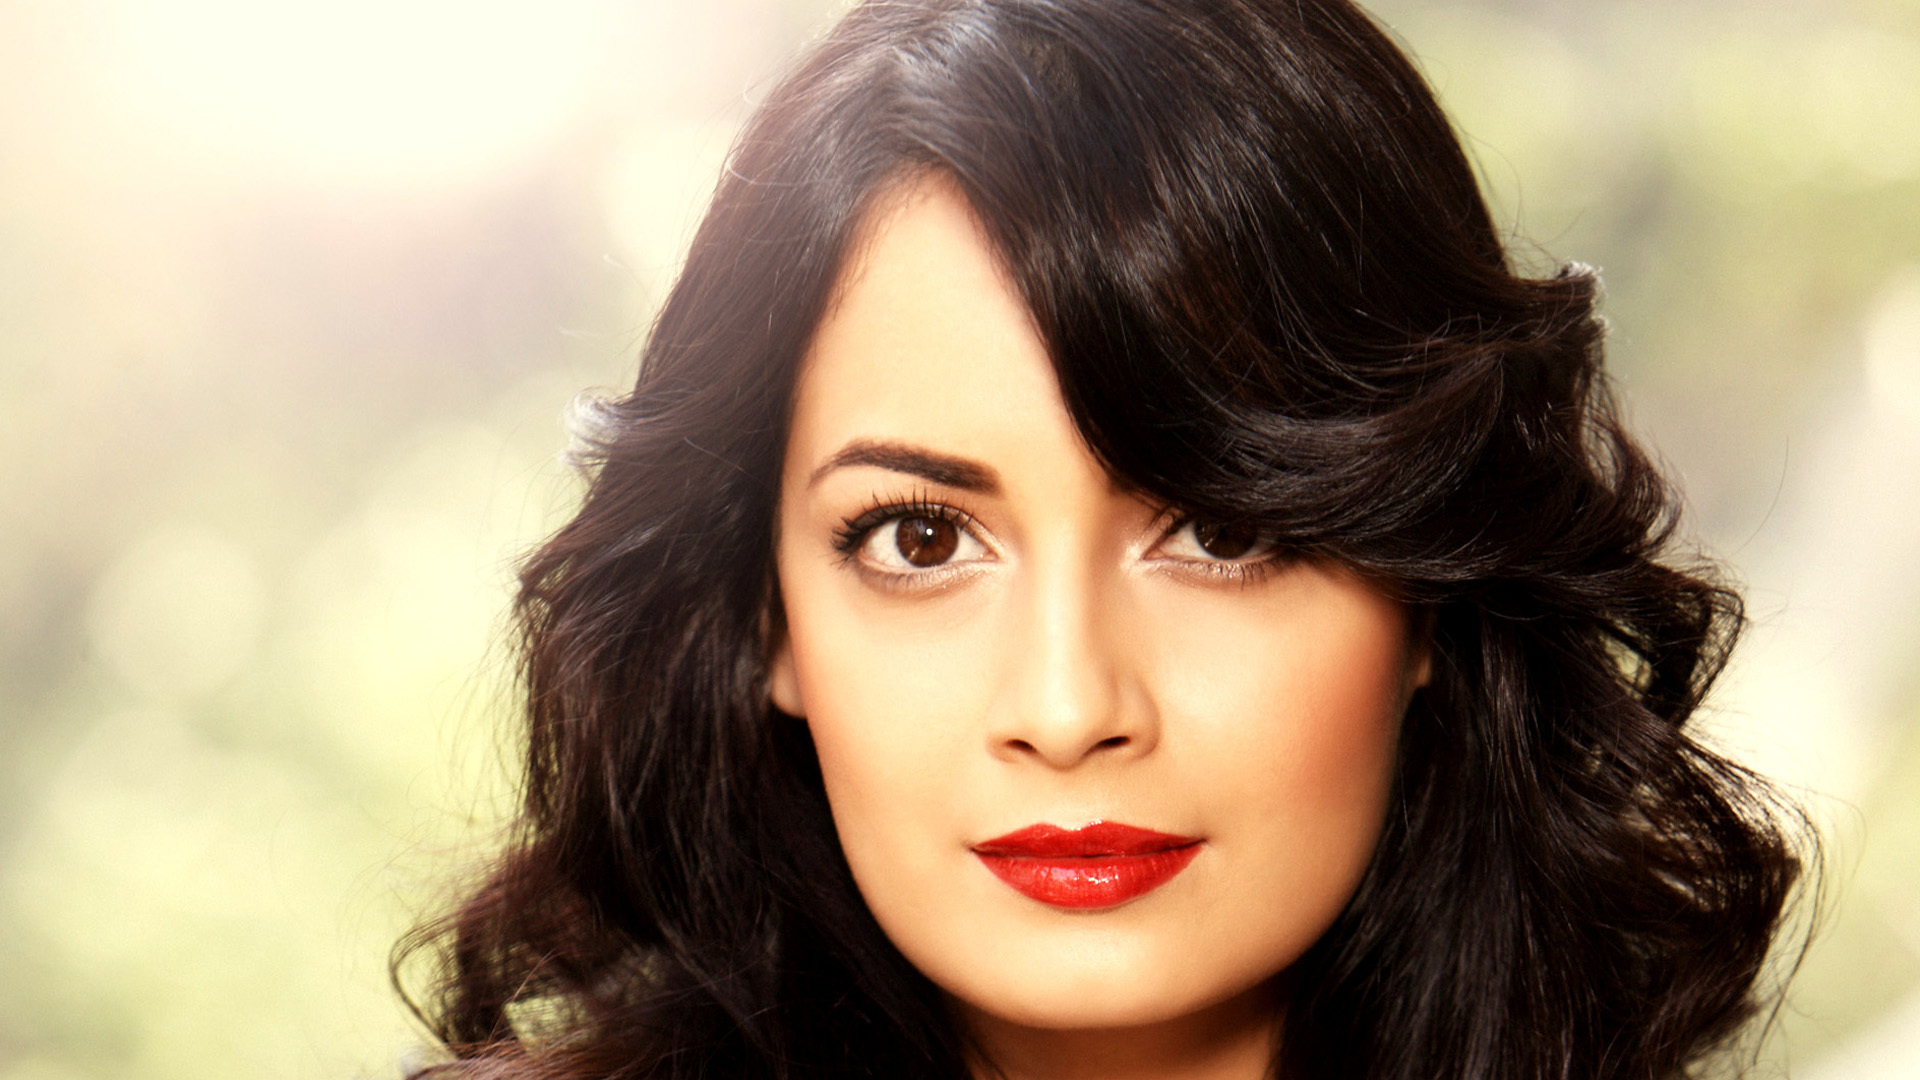 Dia Mirza Wallpaper Image Photos Pictures Background